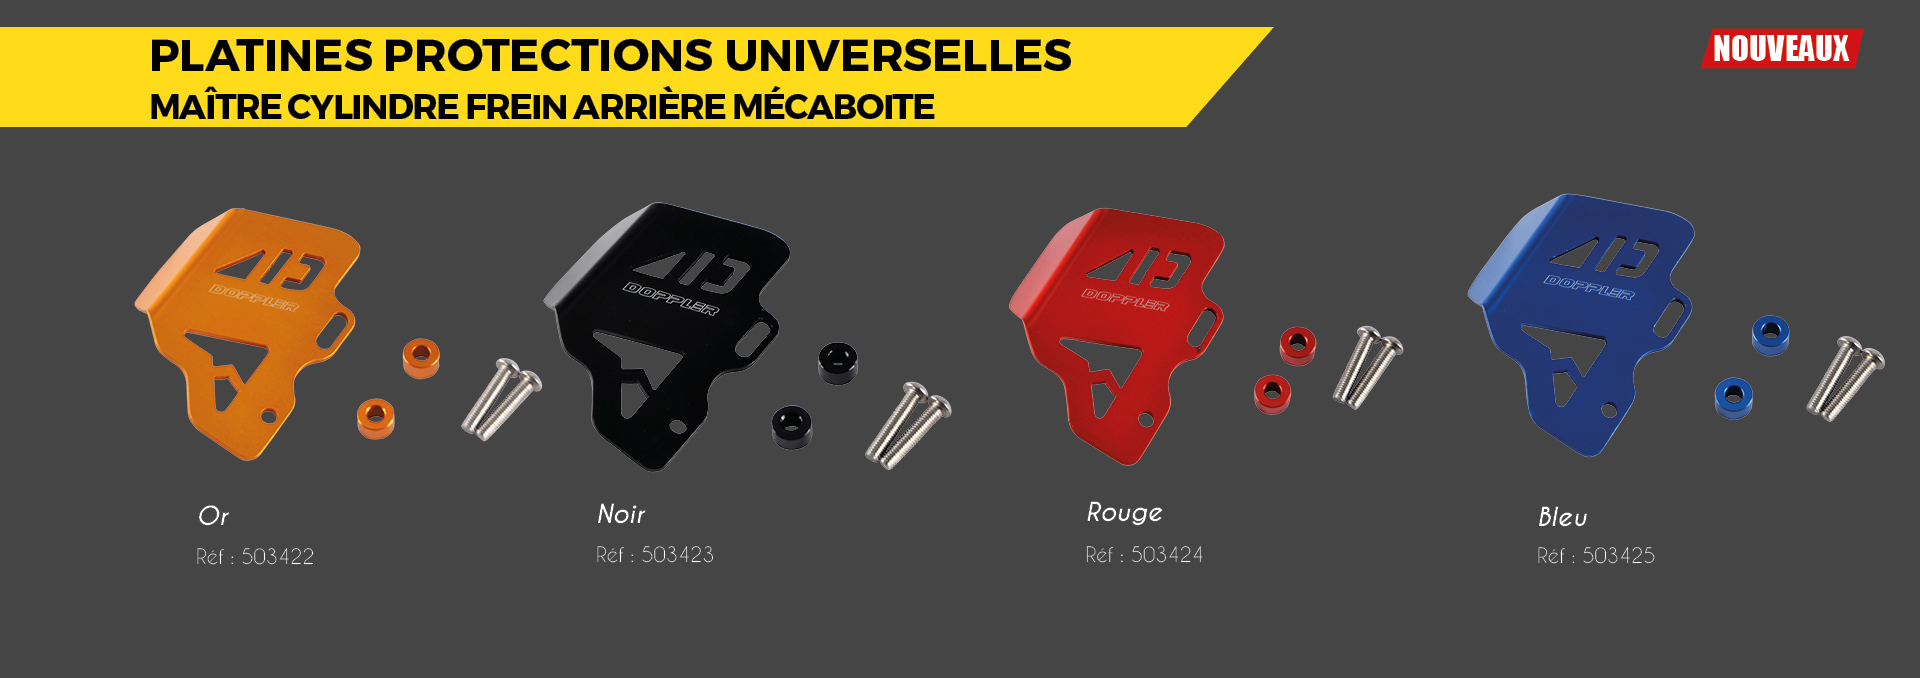 https://www.dopplereurope.com/produits/details/moto/cycle/frein/platine-protection-maitre-cylindre-alu/720_1-FREIN-SCOOTER-BOOSTER-2004-STUNT-ROCKET-CNC-ROUGE-PAIRE2.html